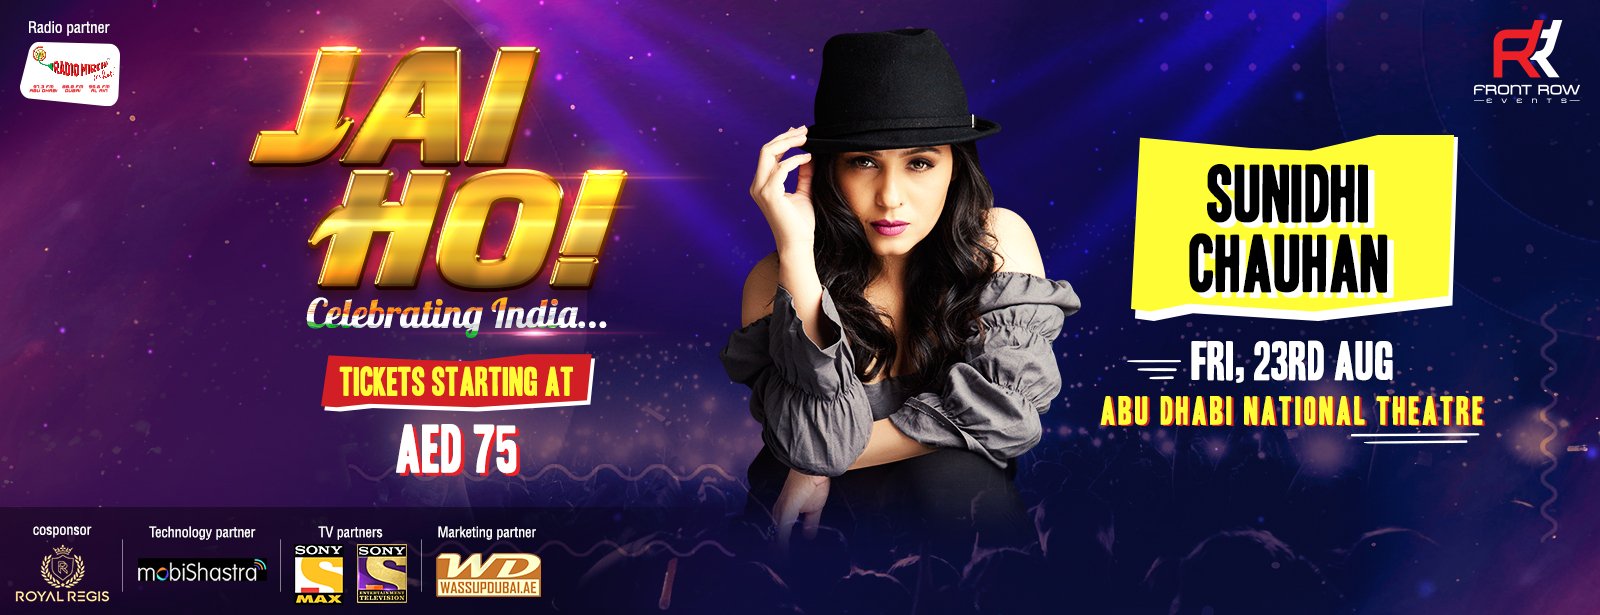 Jai Ho! with Sunidhi Chauhan - Coming Soon in UAE